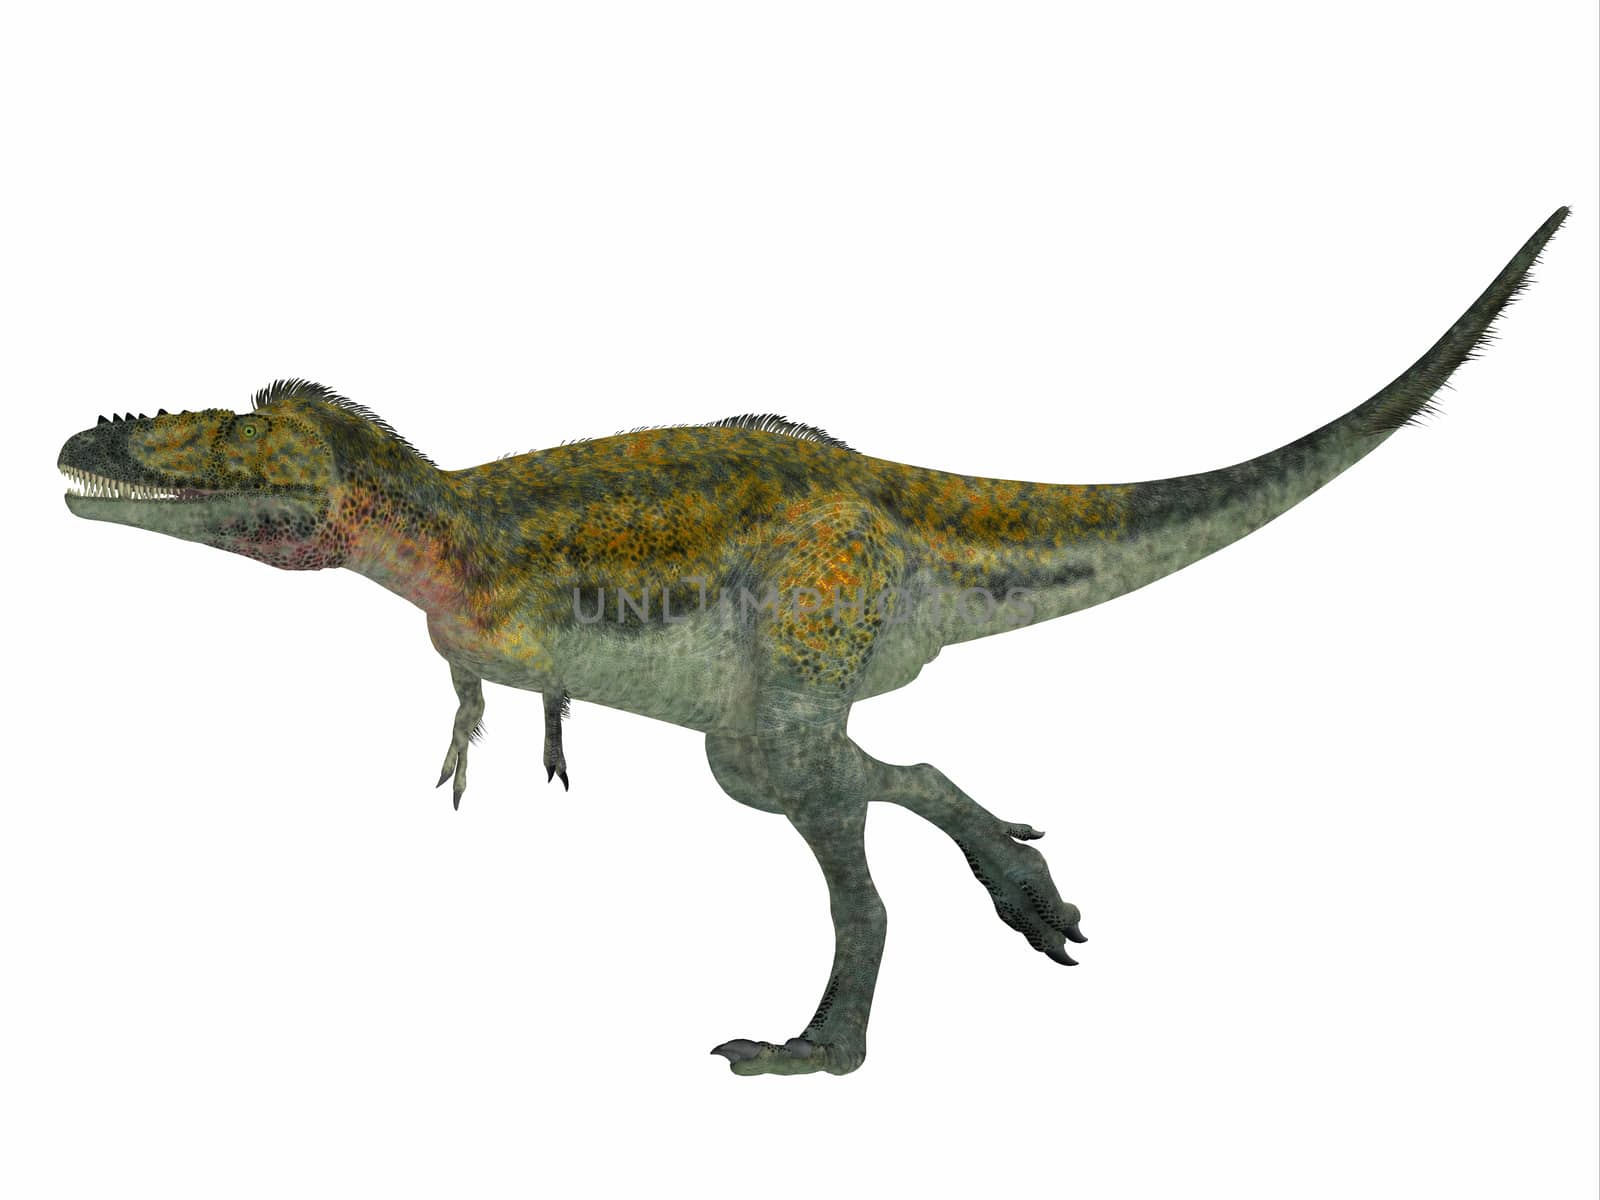 Alioramus was a carnivorous theropod dinosaur that lived in Asia in the Cretaceous Period.